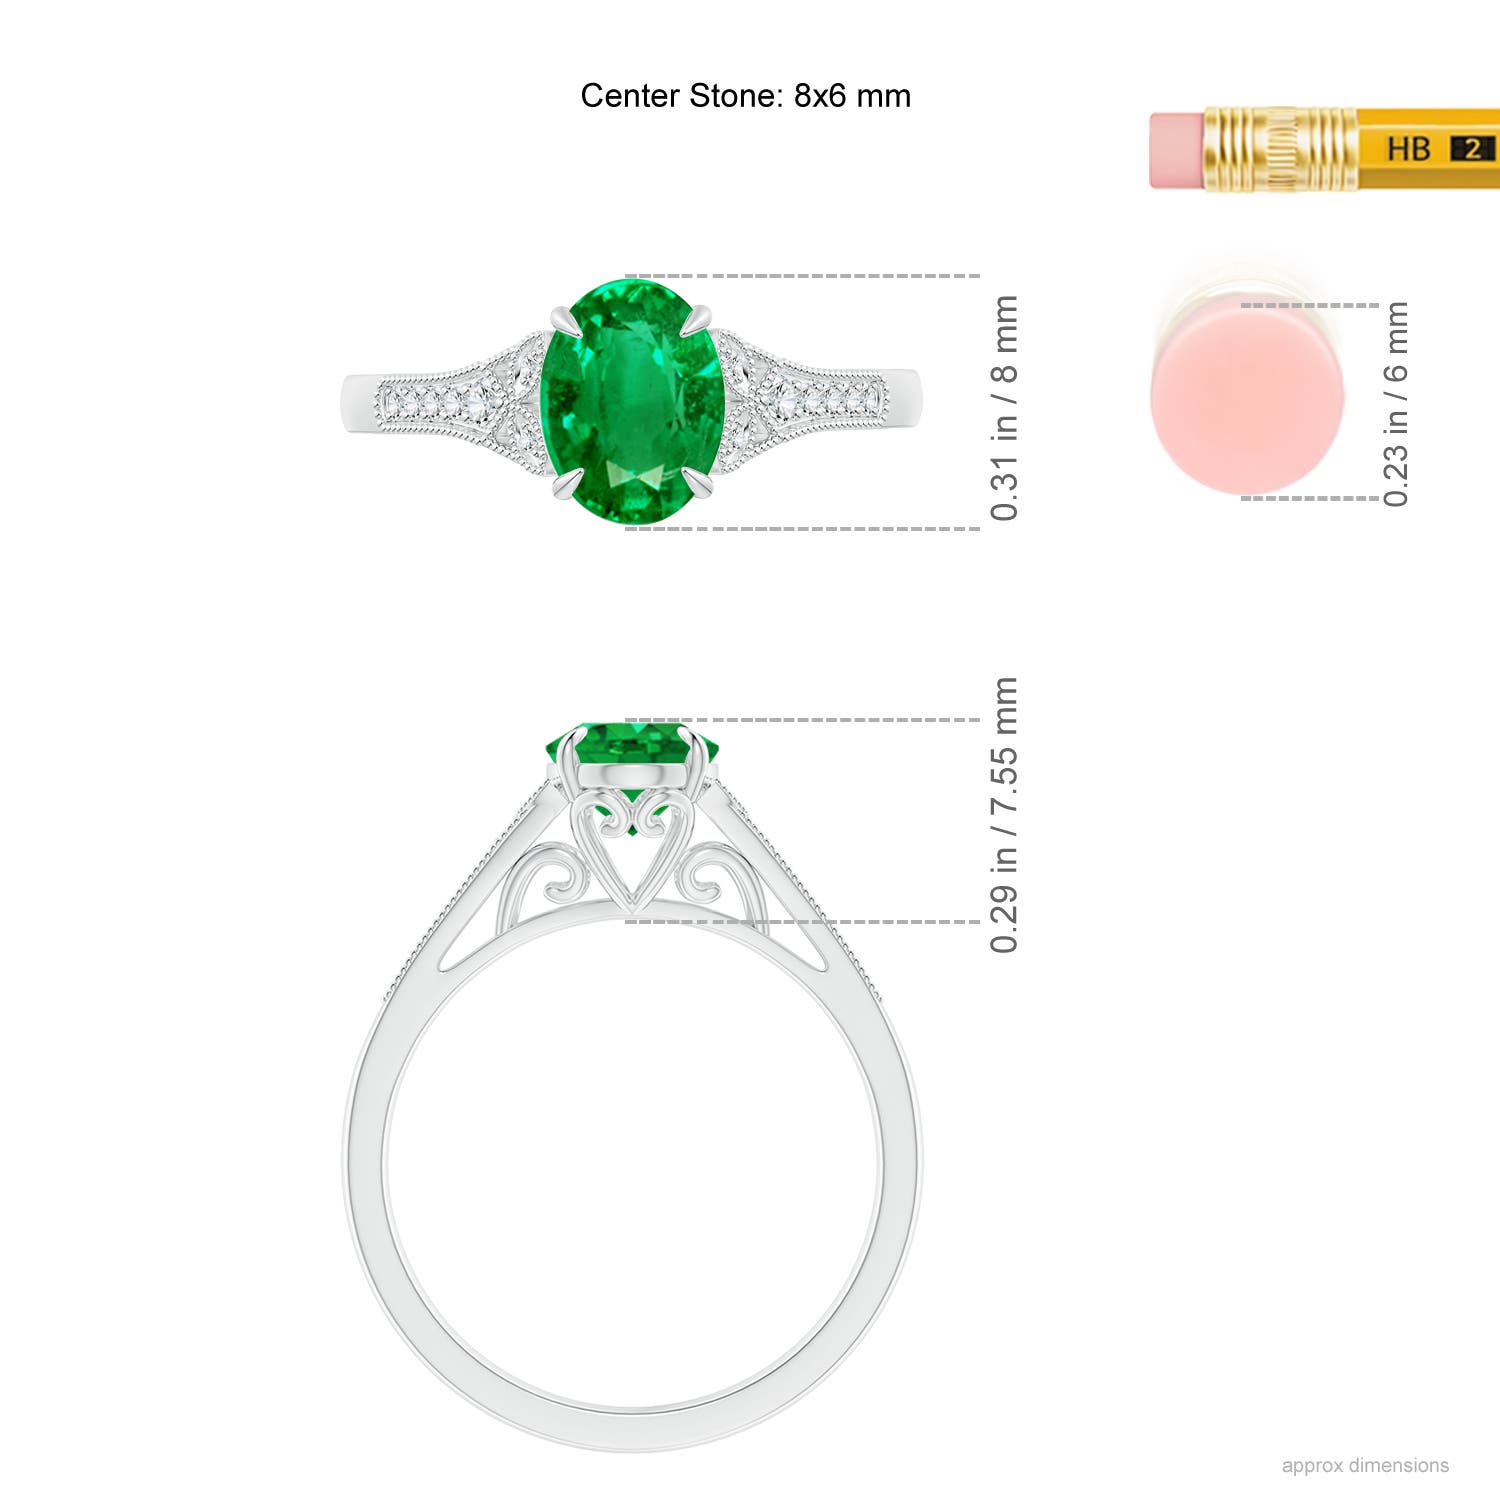 AAA - Emerald / 1.24 CT / 14 KT White Gold